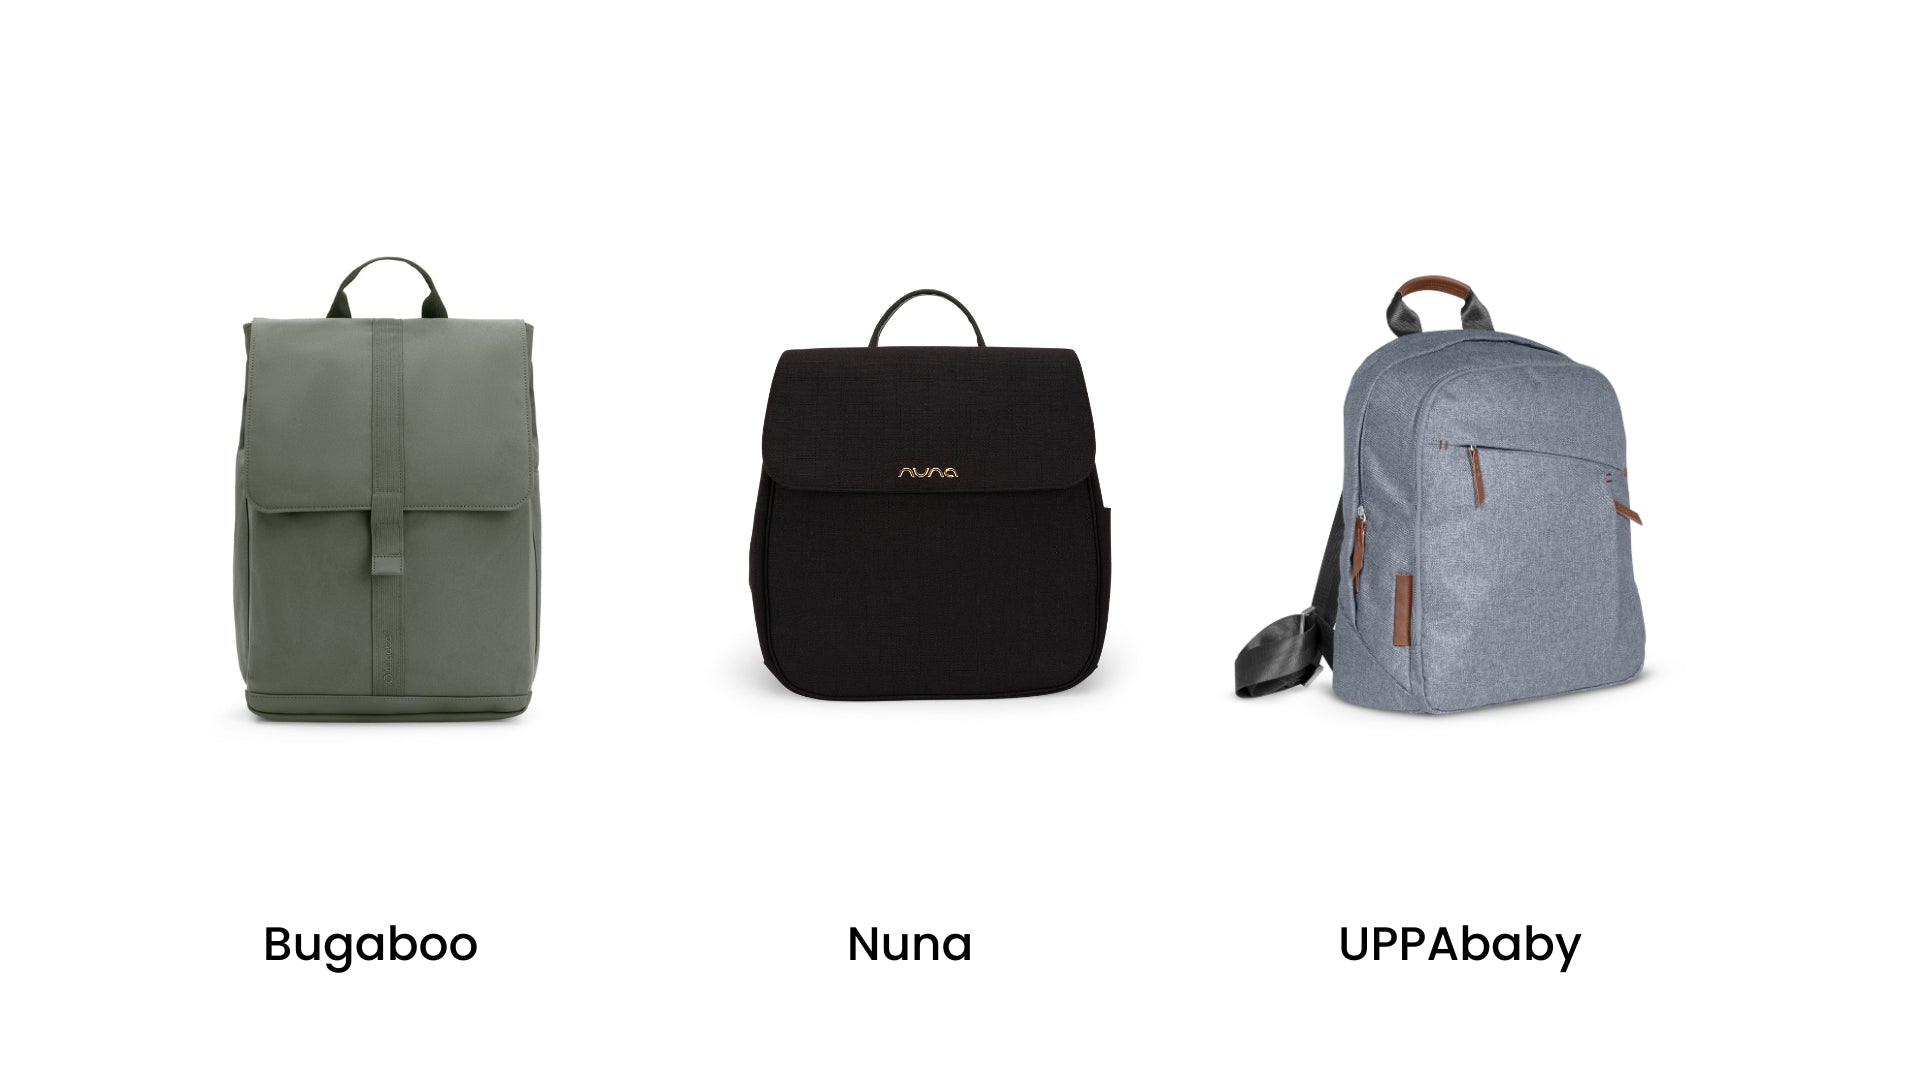 Bugaboo, Nuna and UPPAbaby Diaper Bags